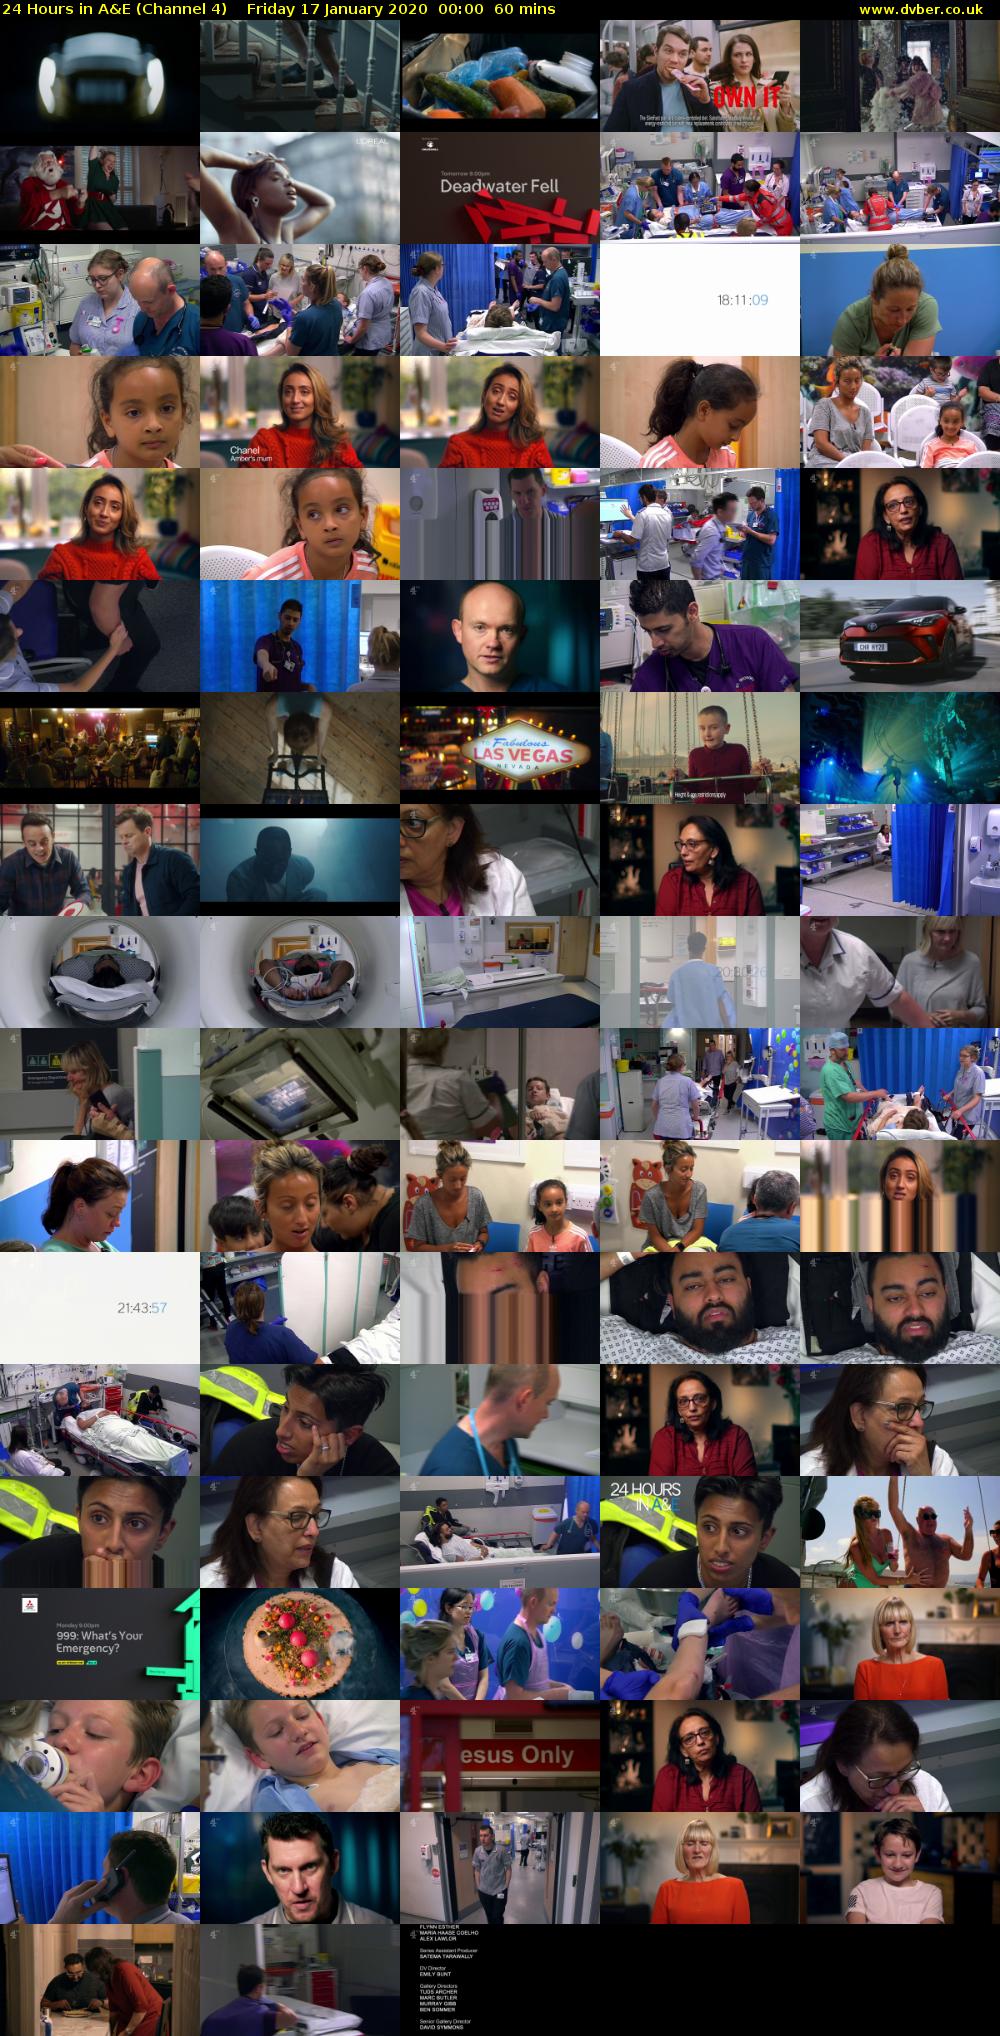 24 Hours in A&E (Channel 4) Friday 17 January 2020 00:00 - 01:00